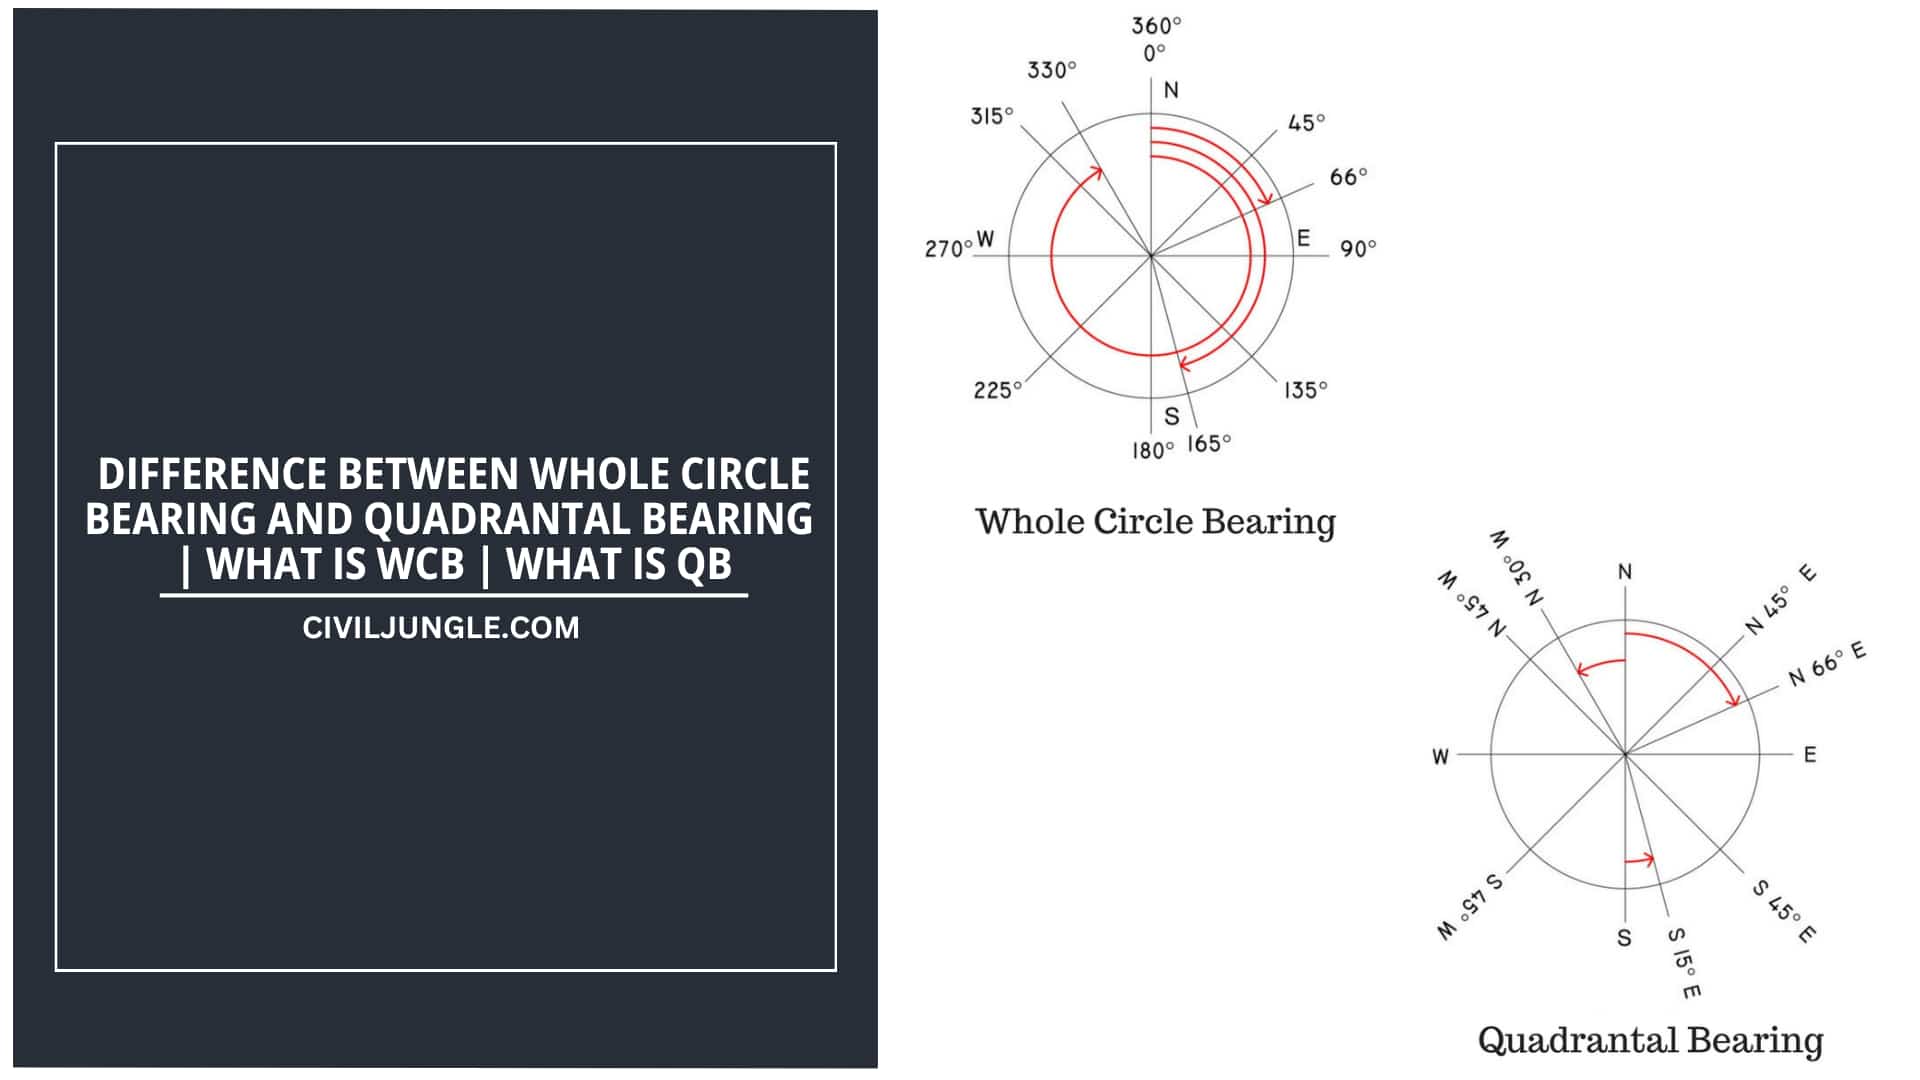 Difference Between Whole Circle Bearing and Quadrantal Bearing | What Is Wcb | What Is Qb